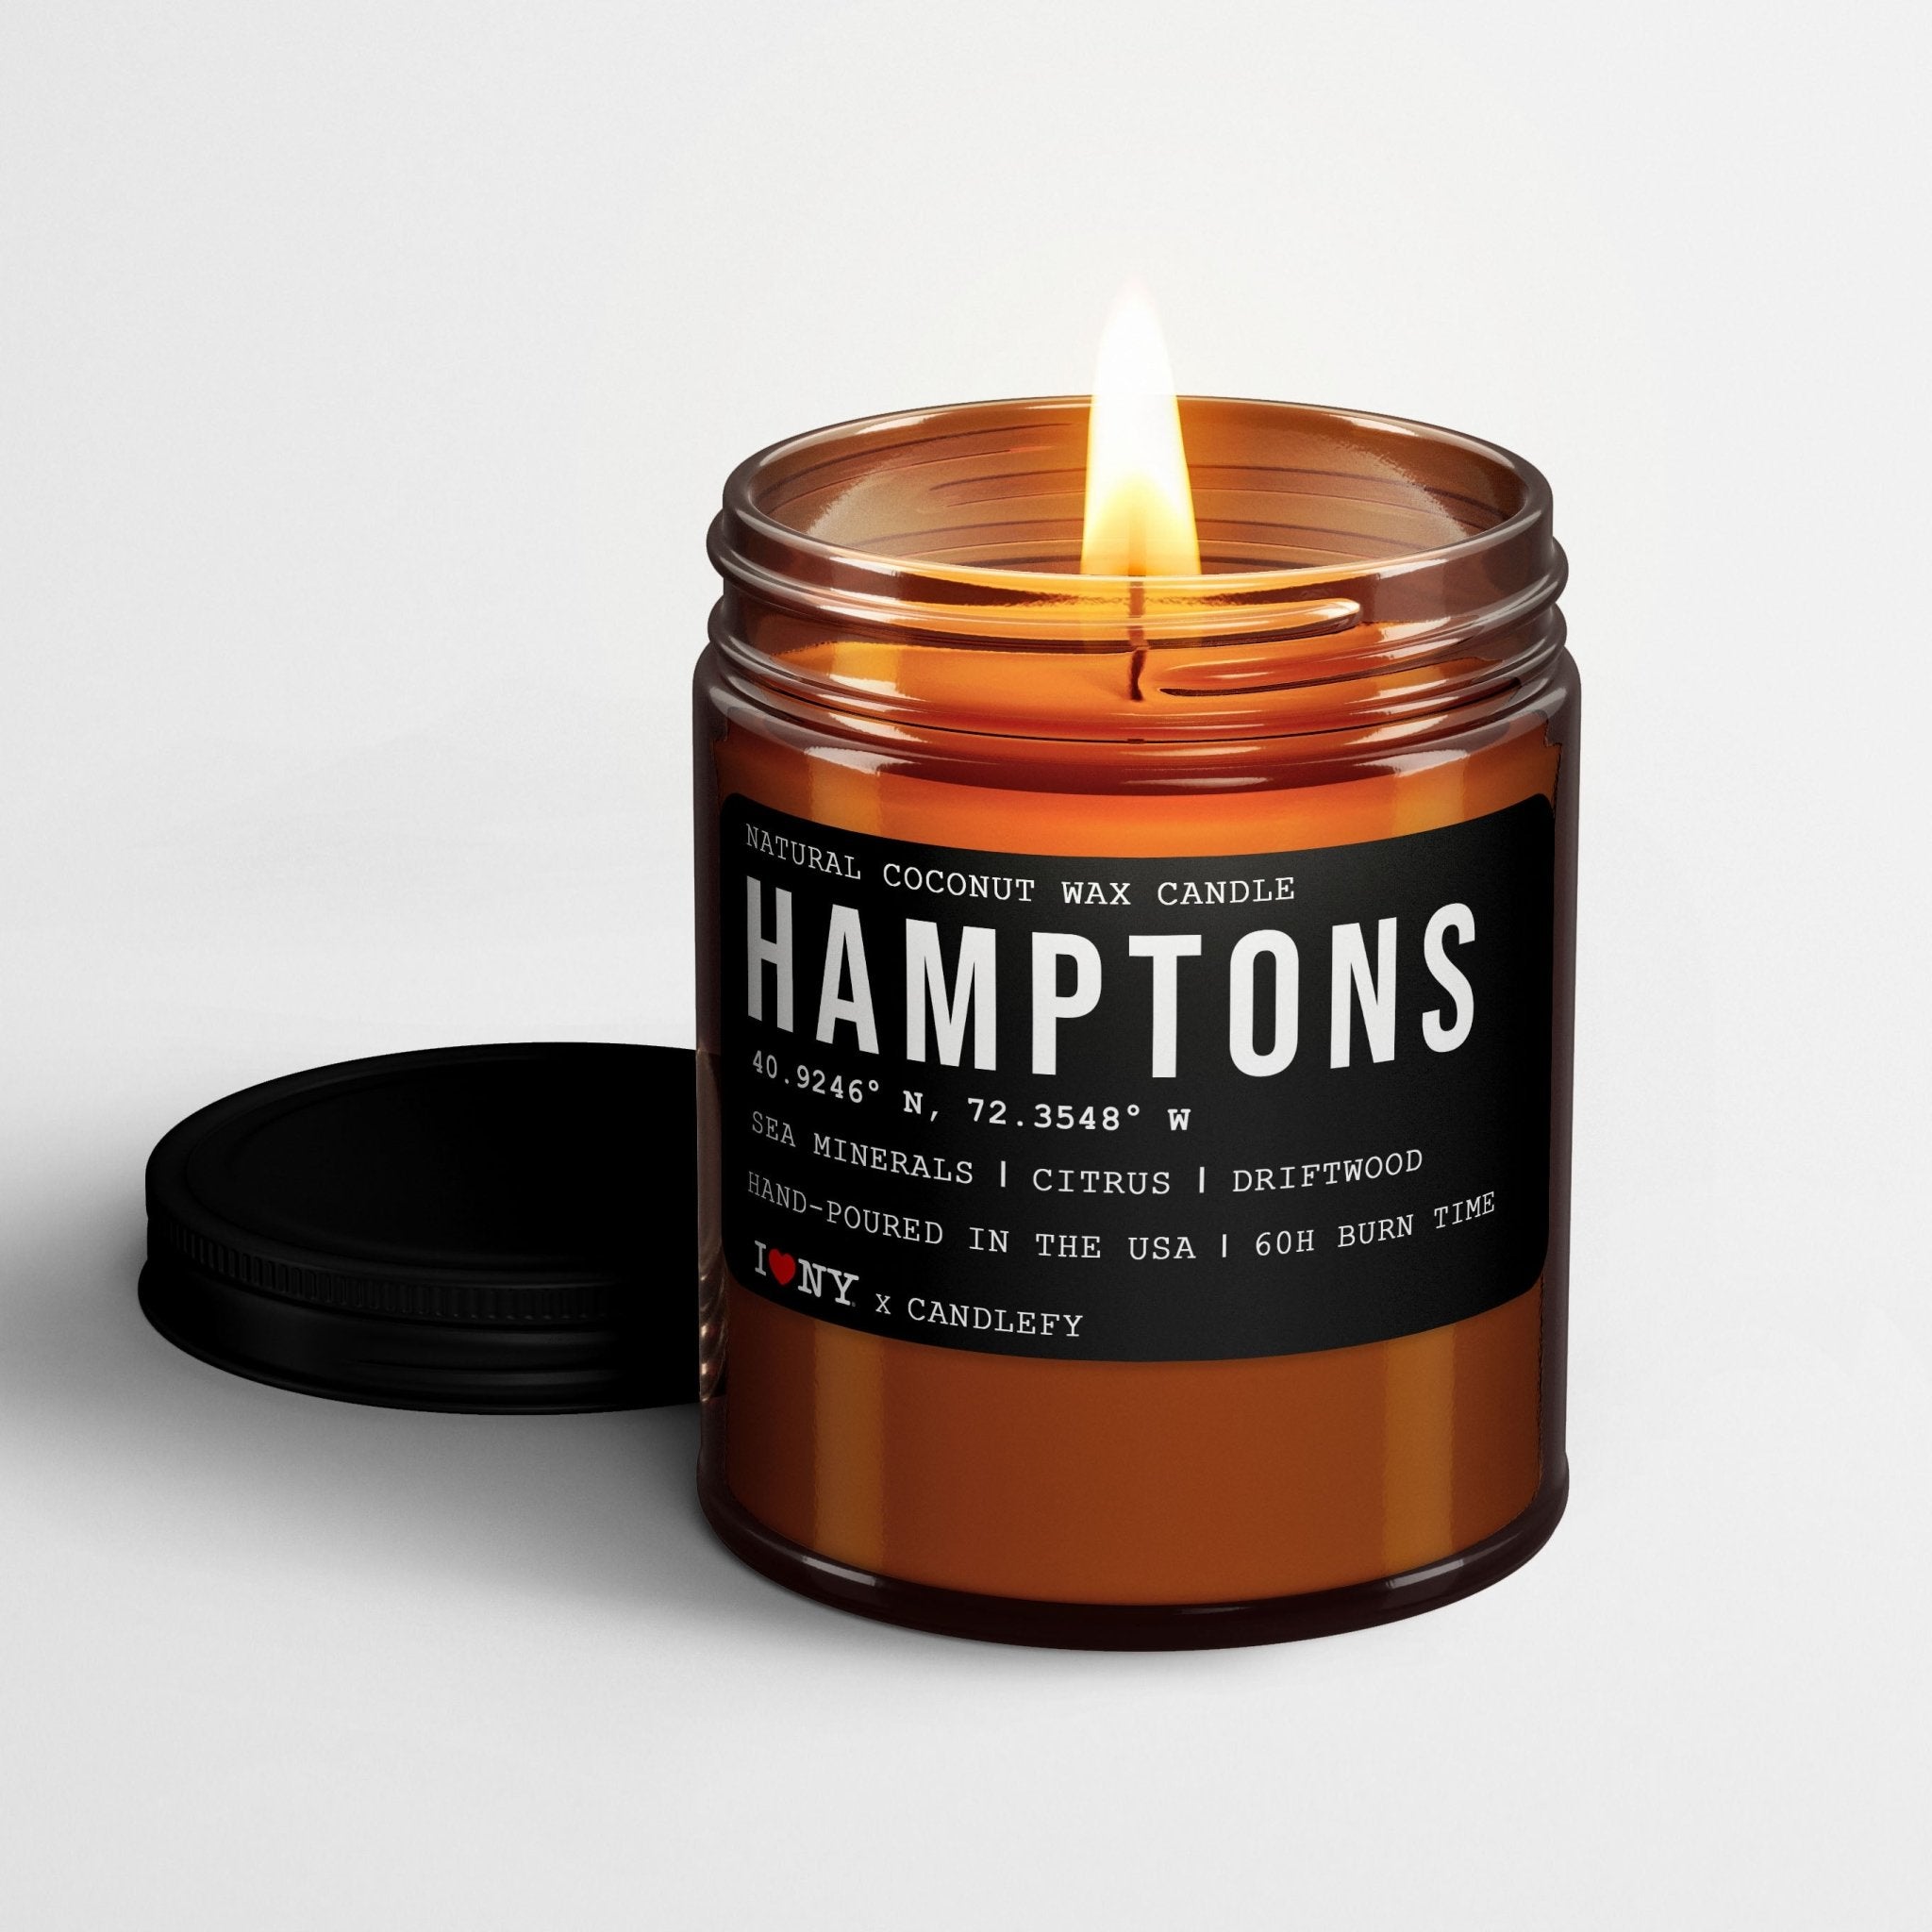 Hamptons: New York Scented Candle (Sea Mineral, Citrus, Amberwood) - Candlefy